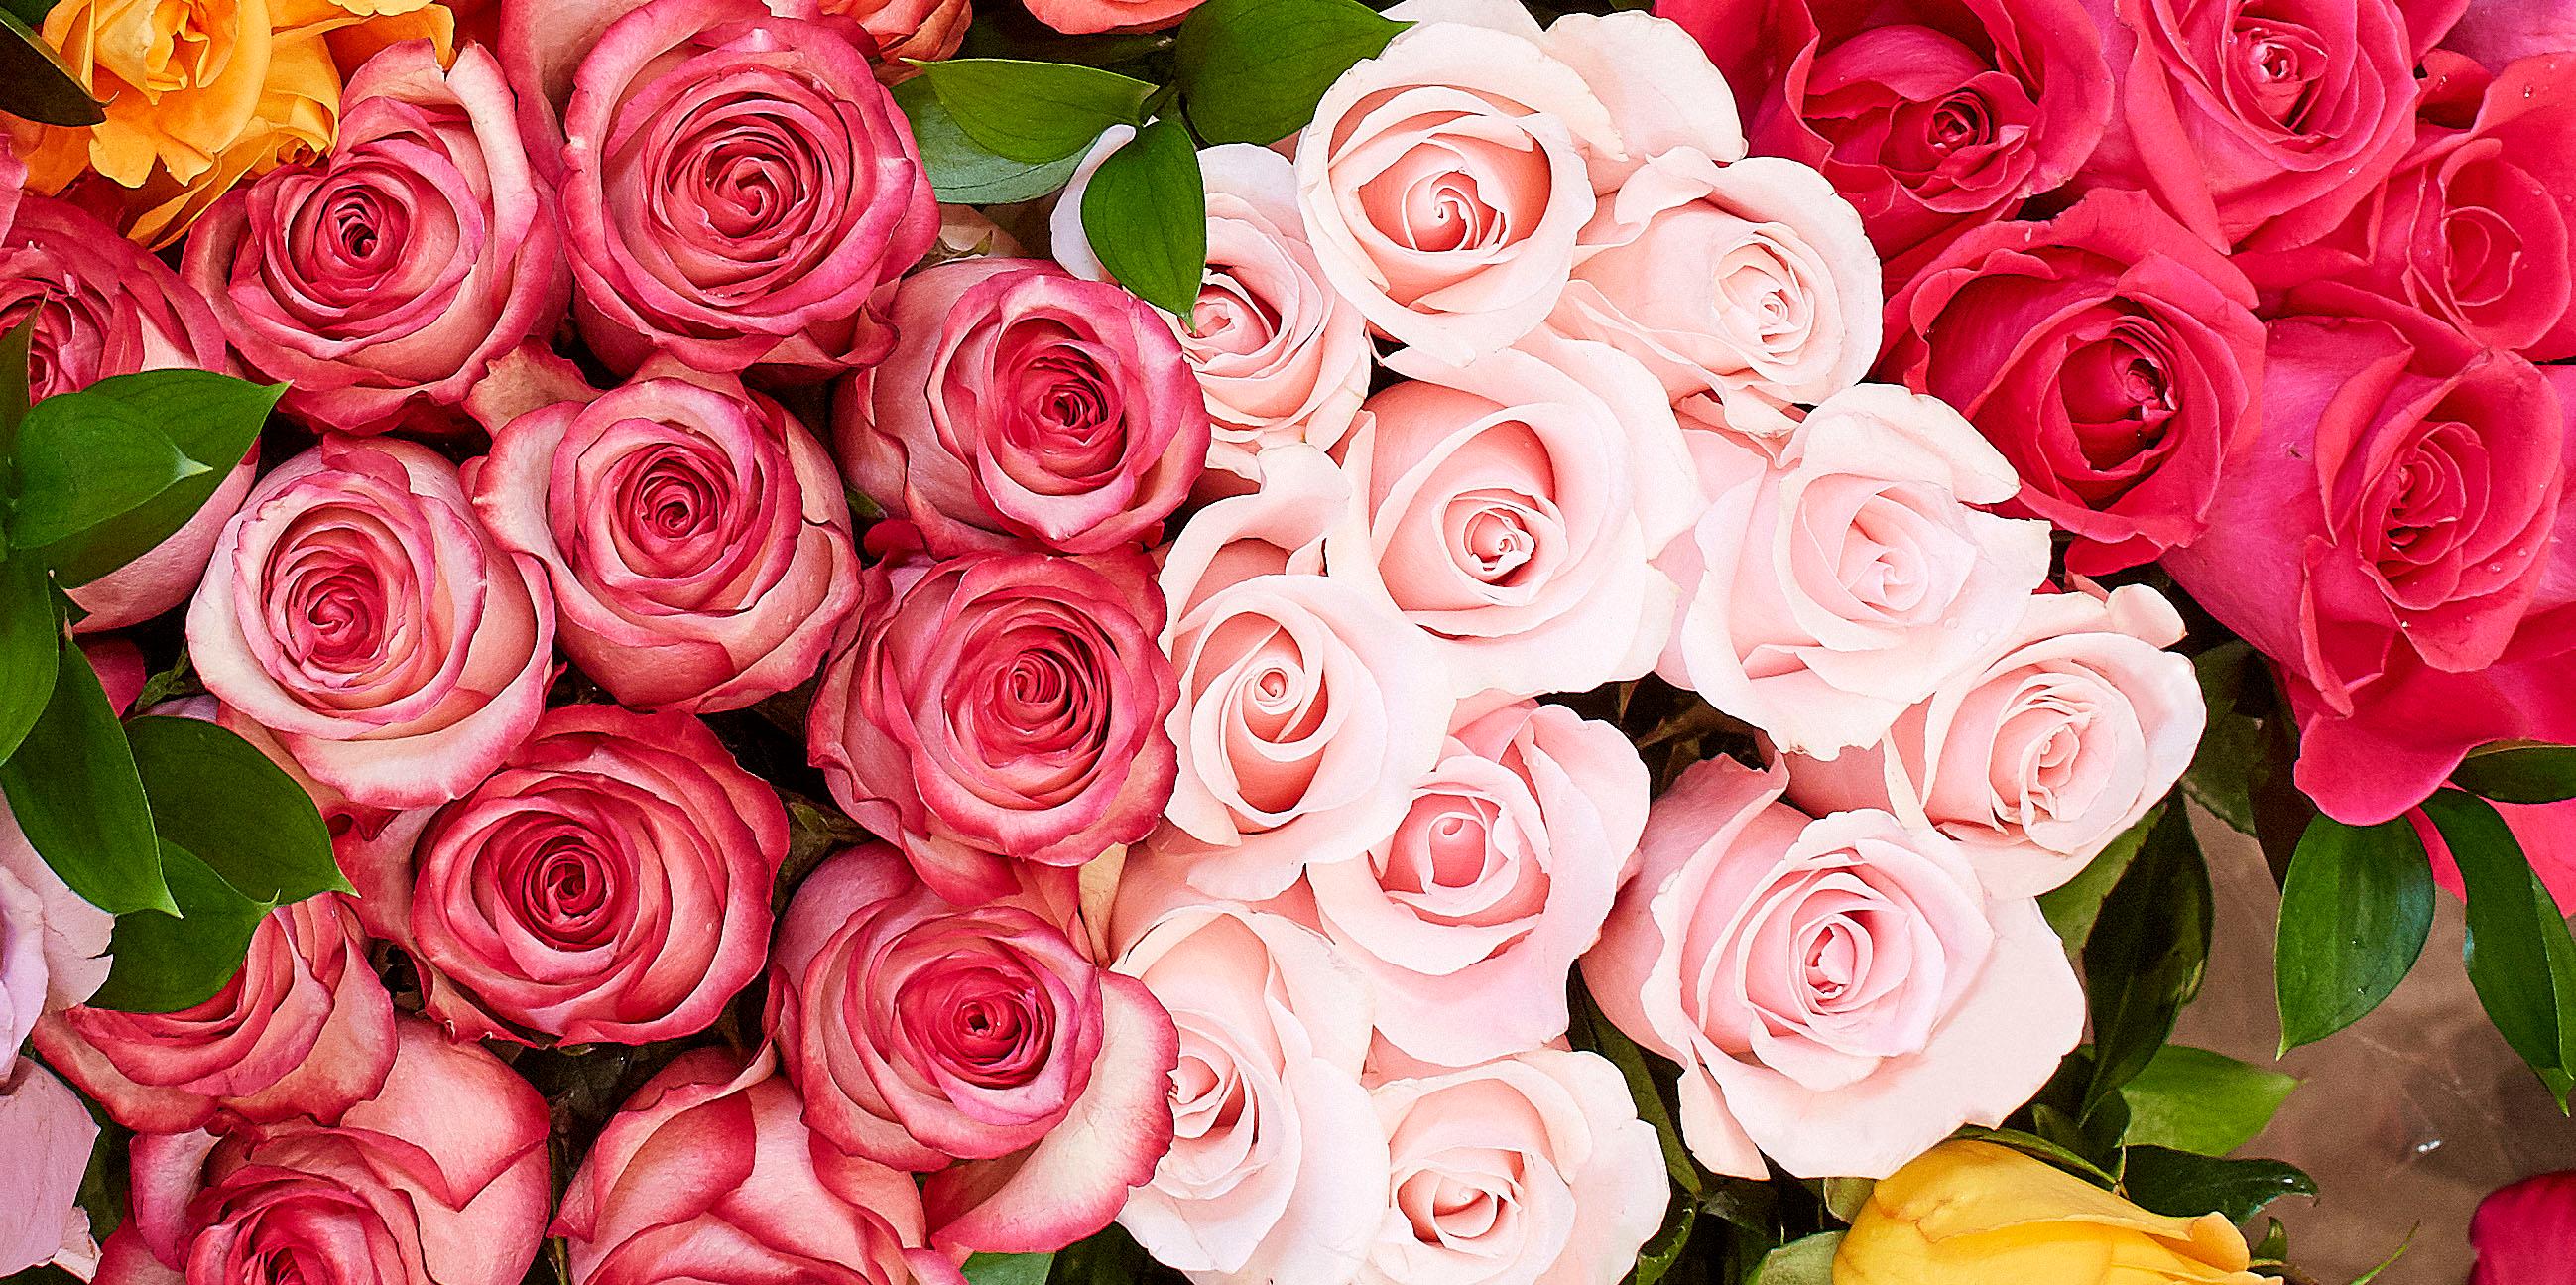 A close up of red and pink roses.